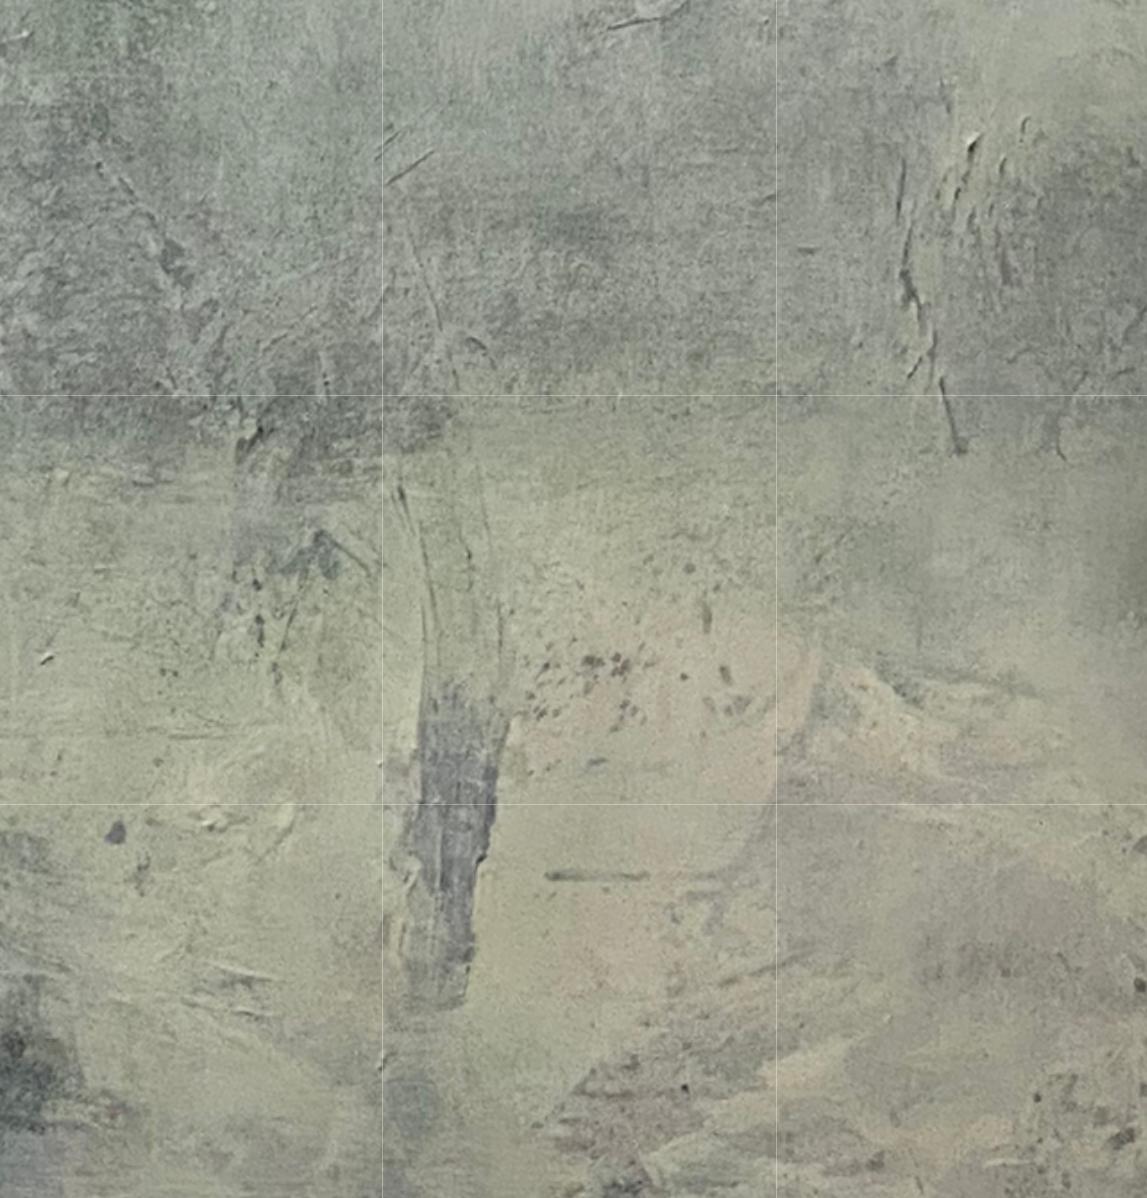 It was a misty day, Contemporary landscape, seafoam, ethereal abstract,   For Sale 3